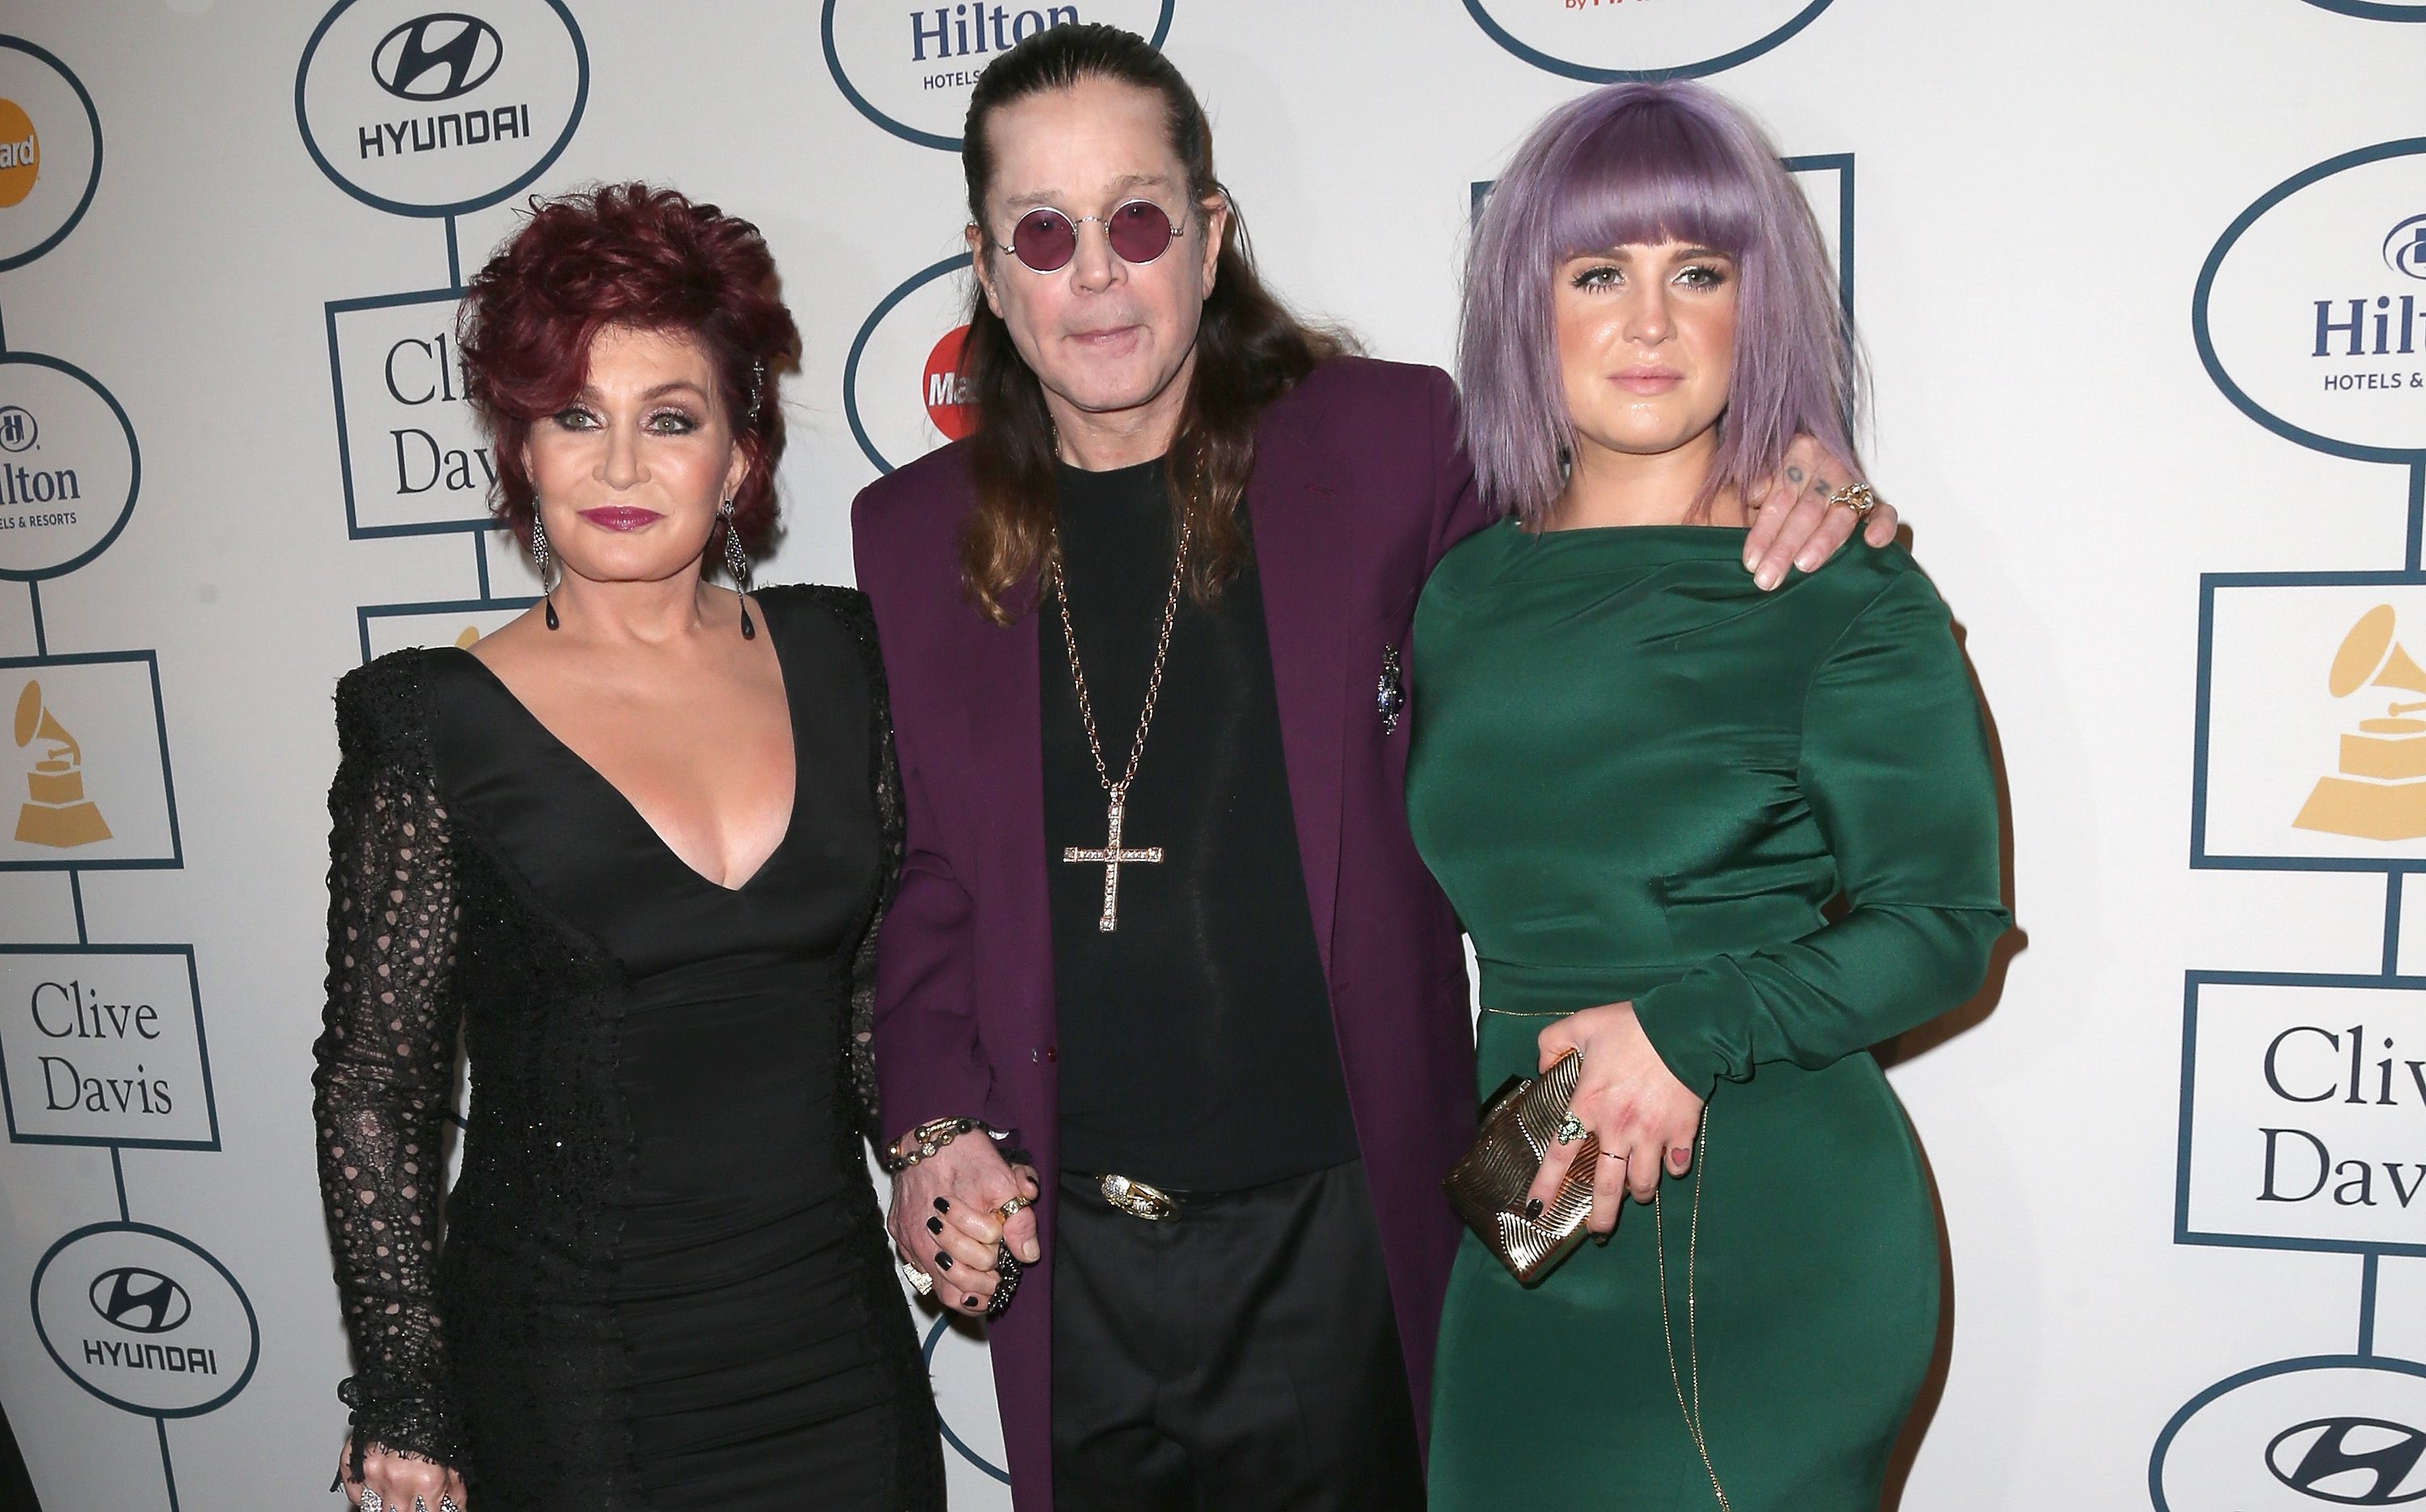 Sharon Osbourne, Kelly Osbourne, and Ozzy Osbourne during the 56th annual GRAMMY Awards Pre-GRAMMY Gala and Salute to Industry Icons honoring Lucian Grainge at The Beverly Hilton on January 25, 2014 in Beverly Hills, California. | Source: Getty Images